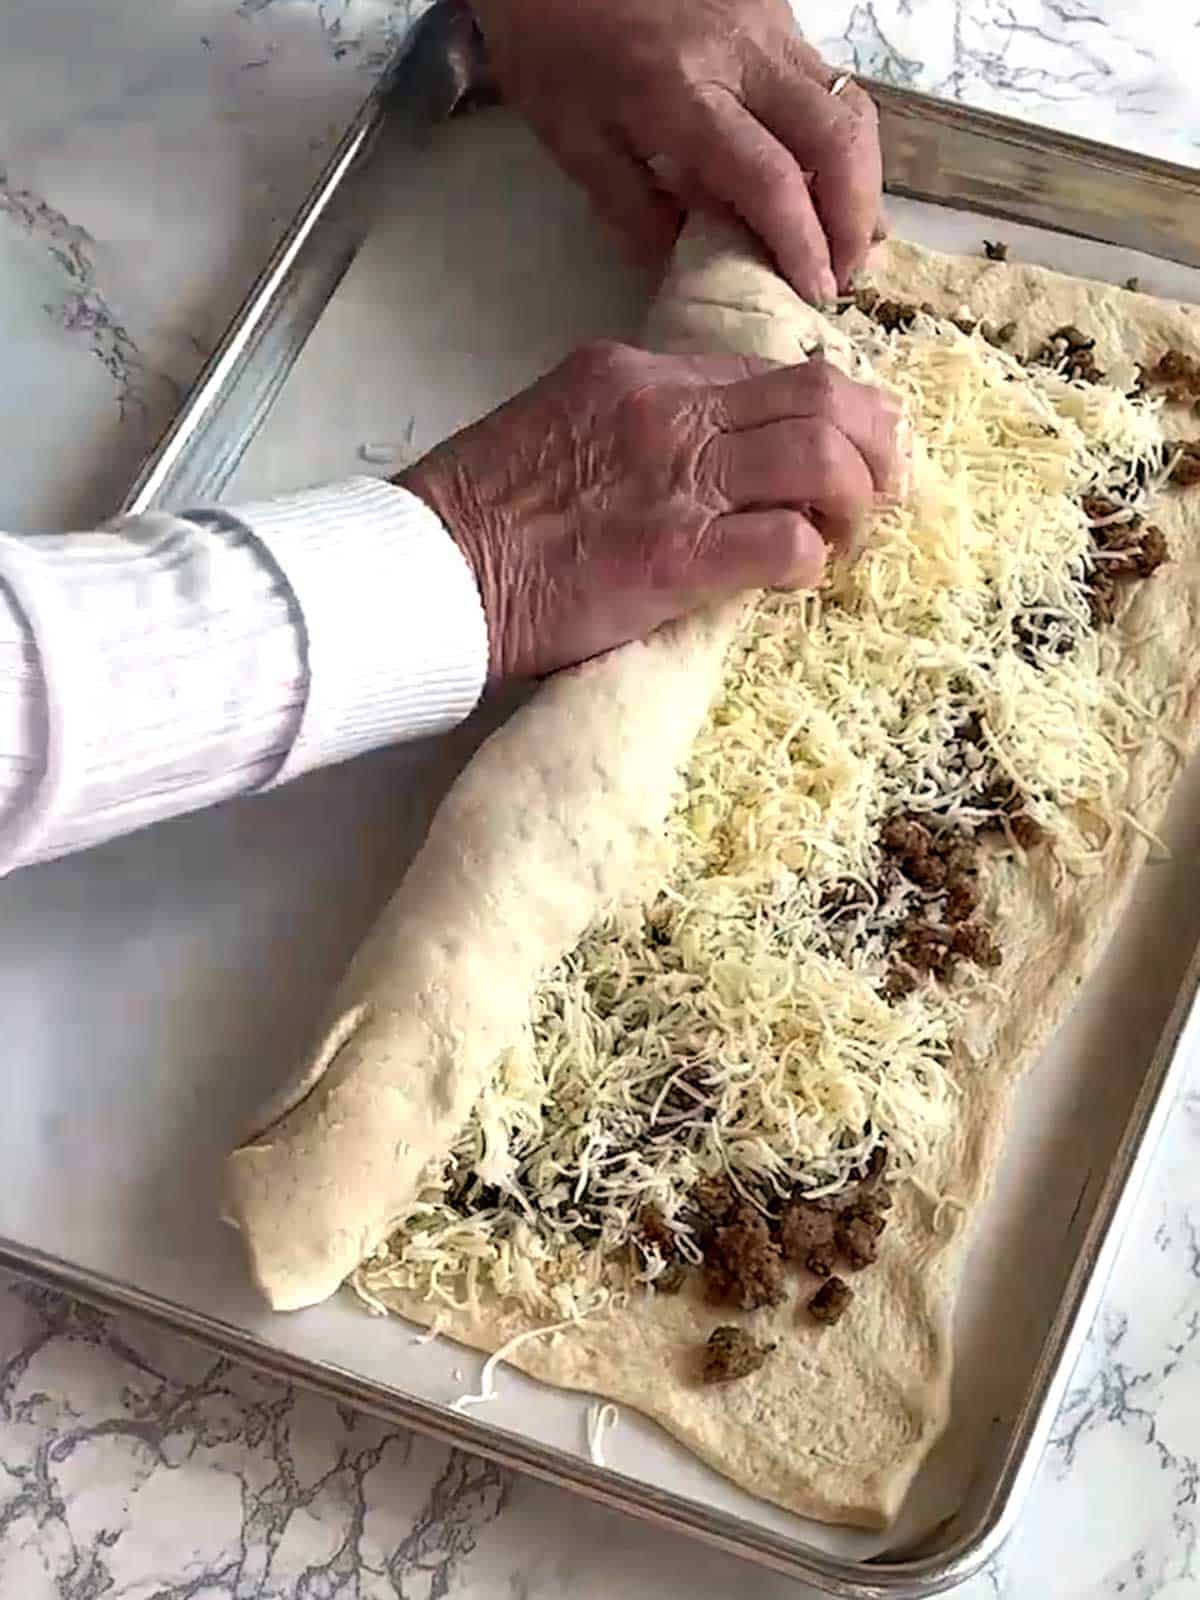 Rolling the sausage bread into a log.